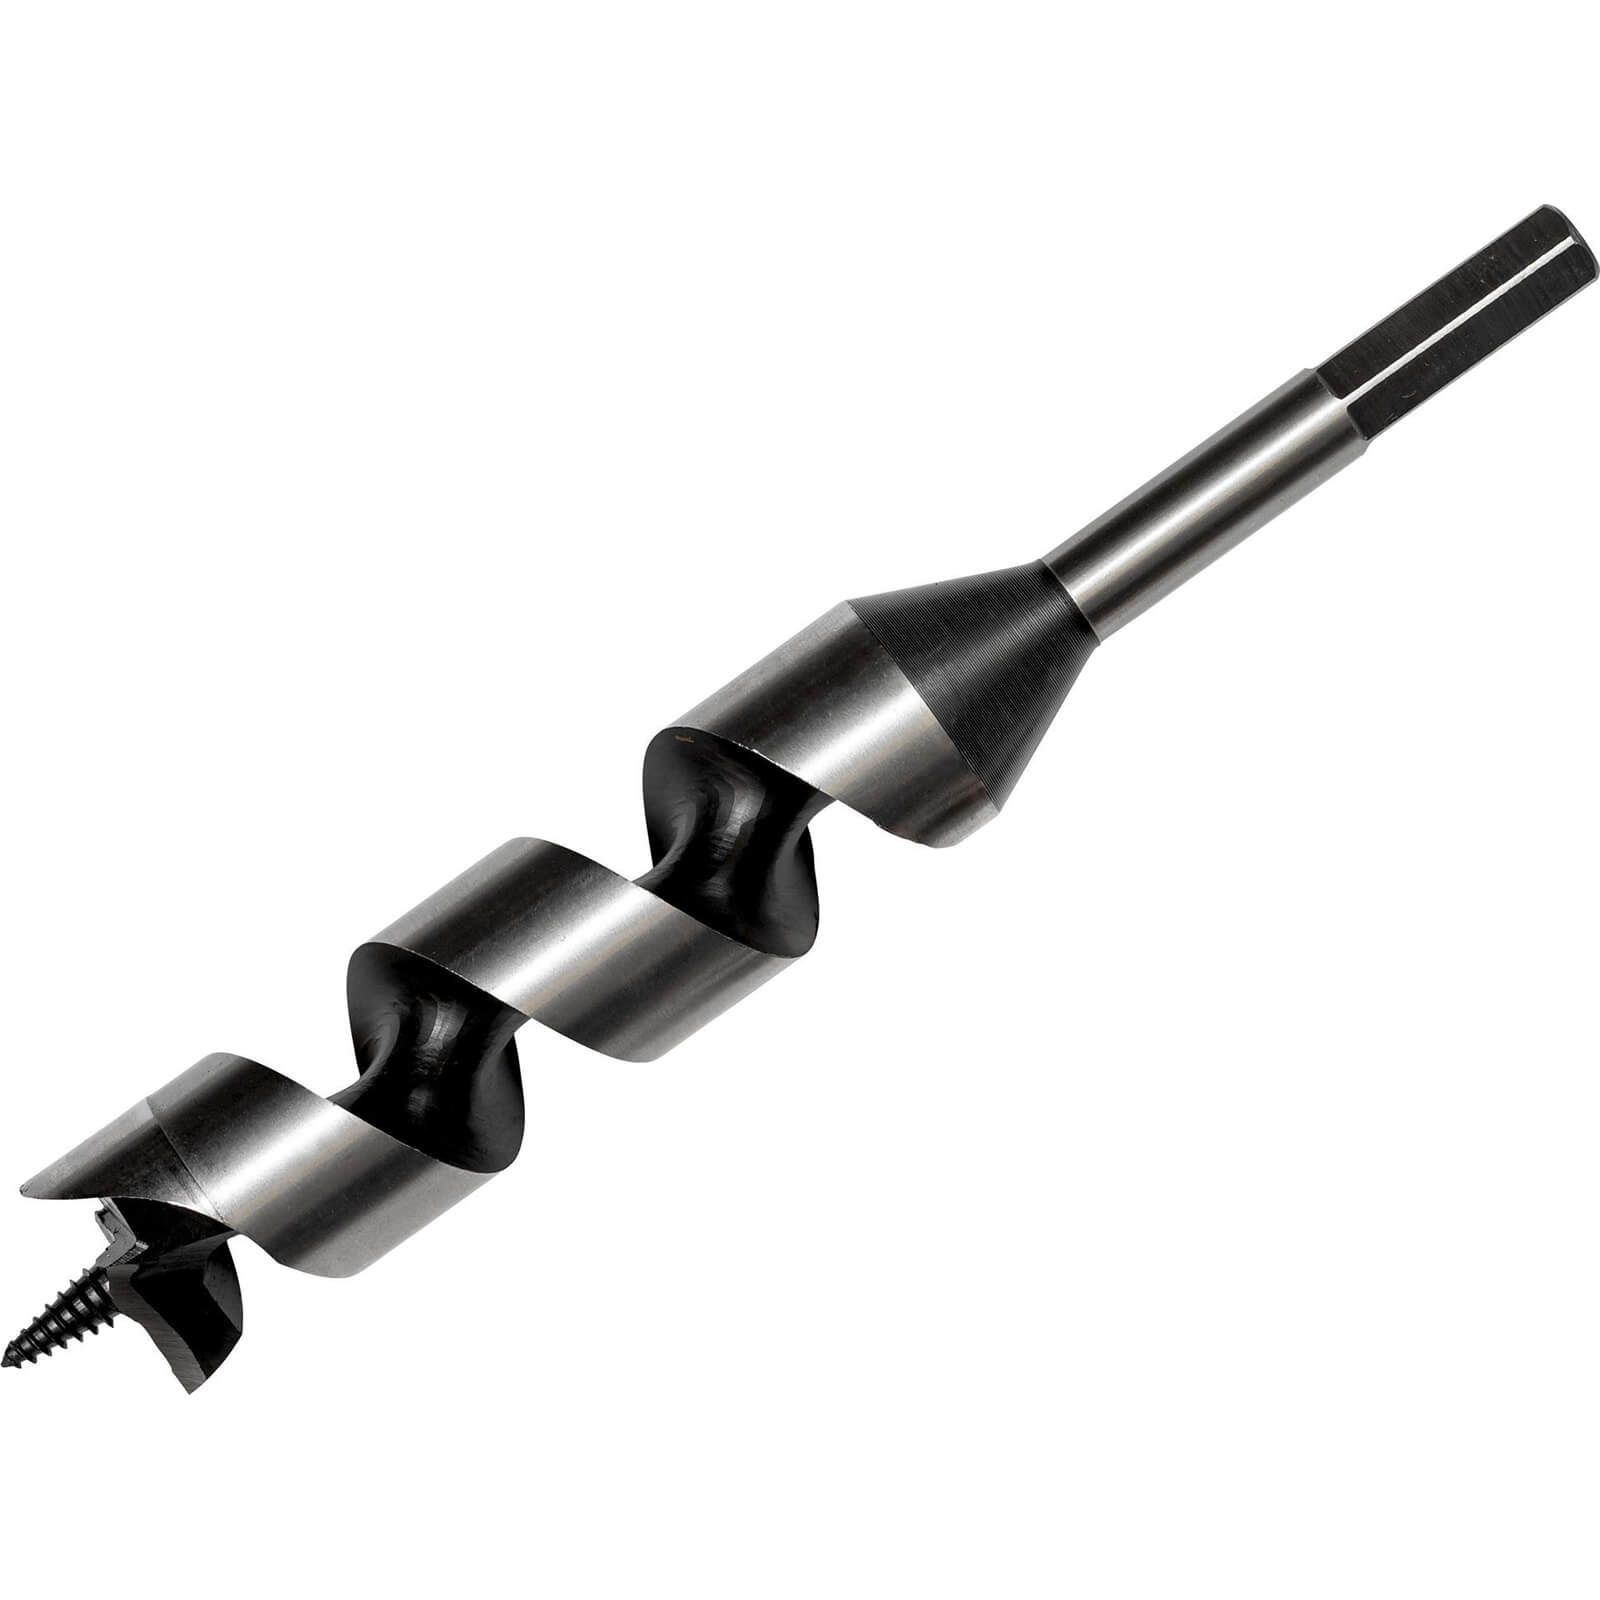 Image of Bahco 9626 Series Combination Auger Drill Bit 14mm 230mm